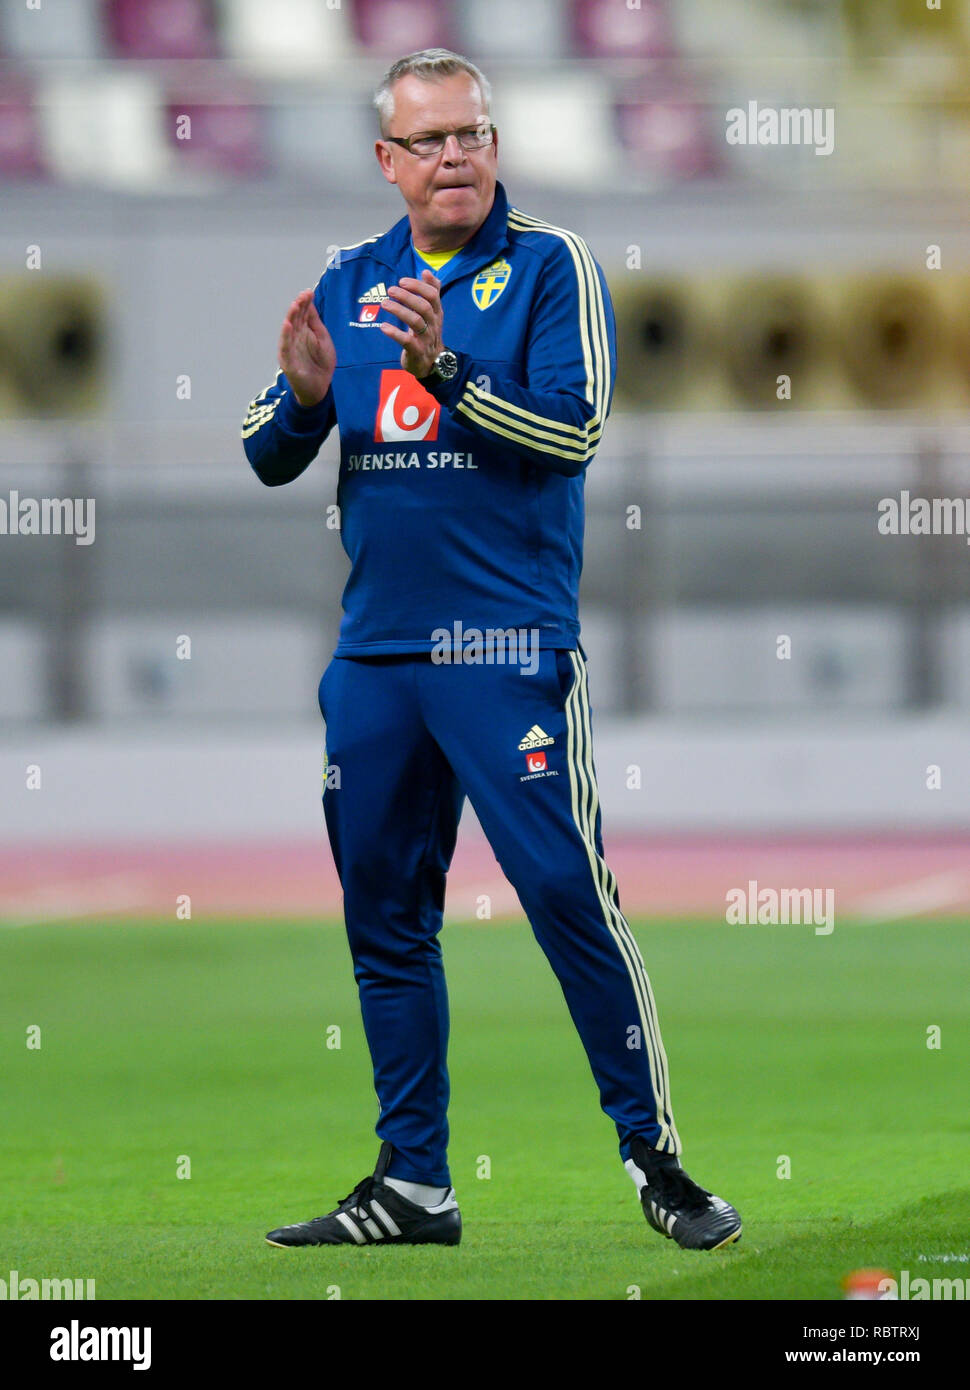 Doha, Qatar. 11th Jan, 2019. Sweden's head coach Janne Andersson reacts during the international friendly soccer match between Sweden and Iceland in Doha, Qatar, Jan. 11, 2019. The match ended in a 2-2 draw. Credit: Nikku/Xinhua/Alamy Live News Stock Photo